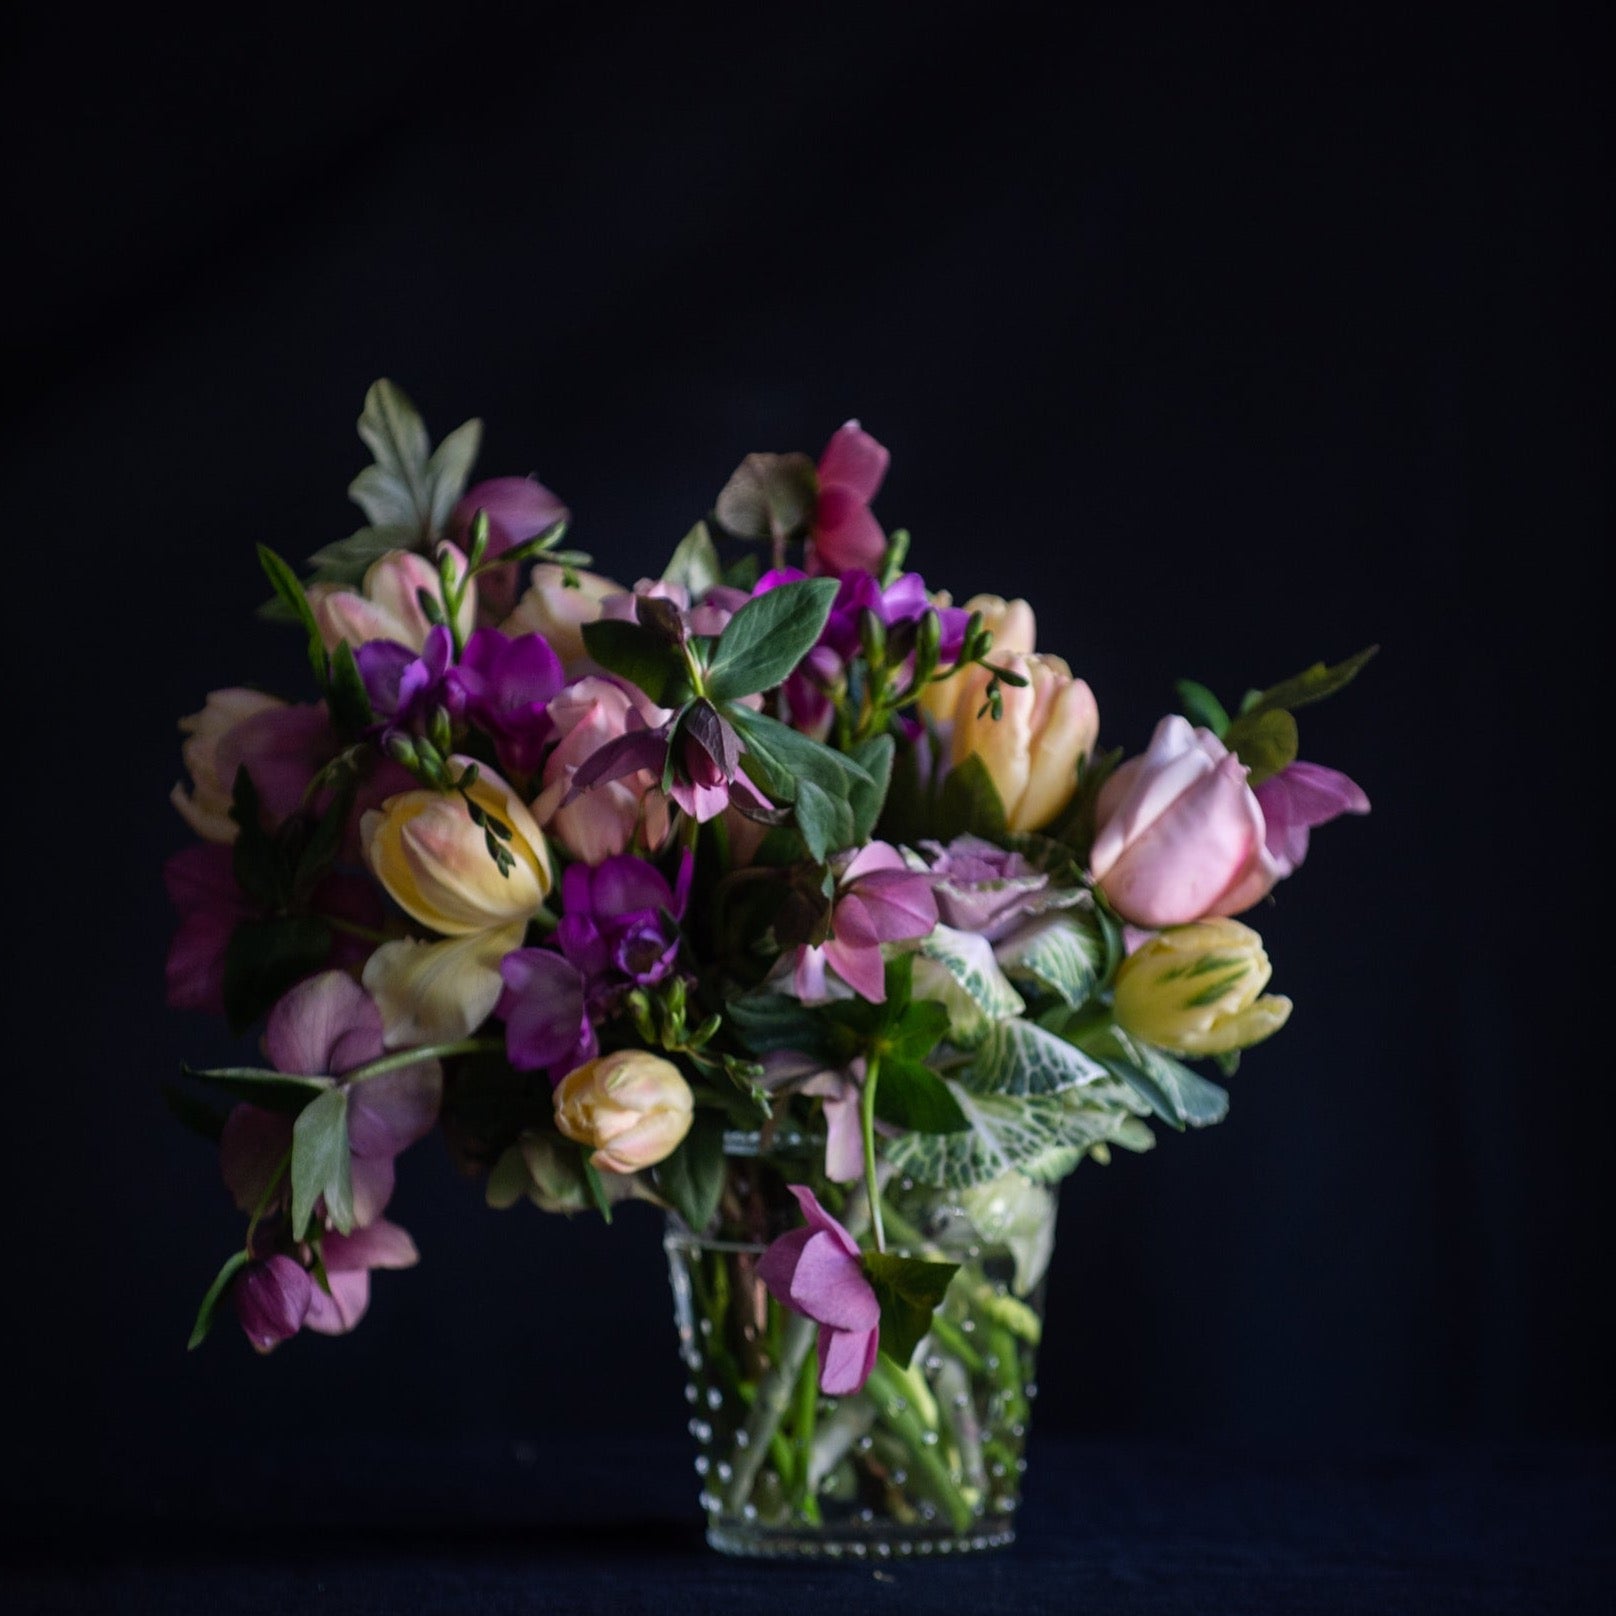 A wild design of tulips, freesia and seasonal stems in a clear vase.